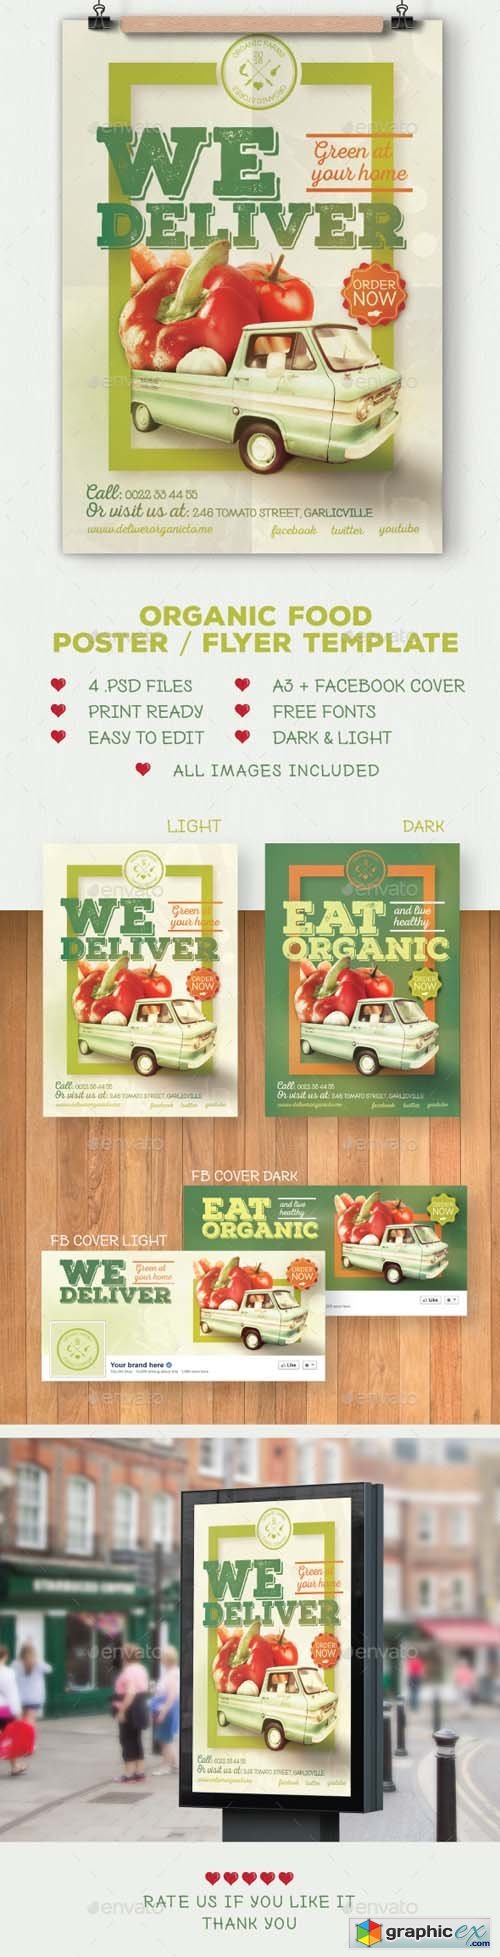 Organic food poster / flyer template